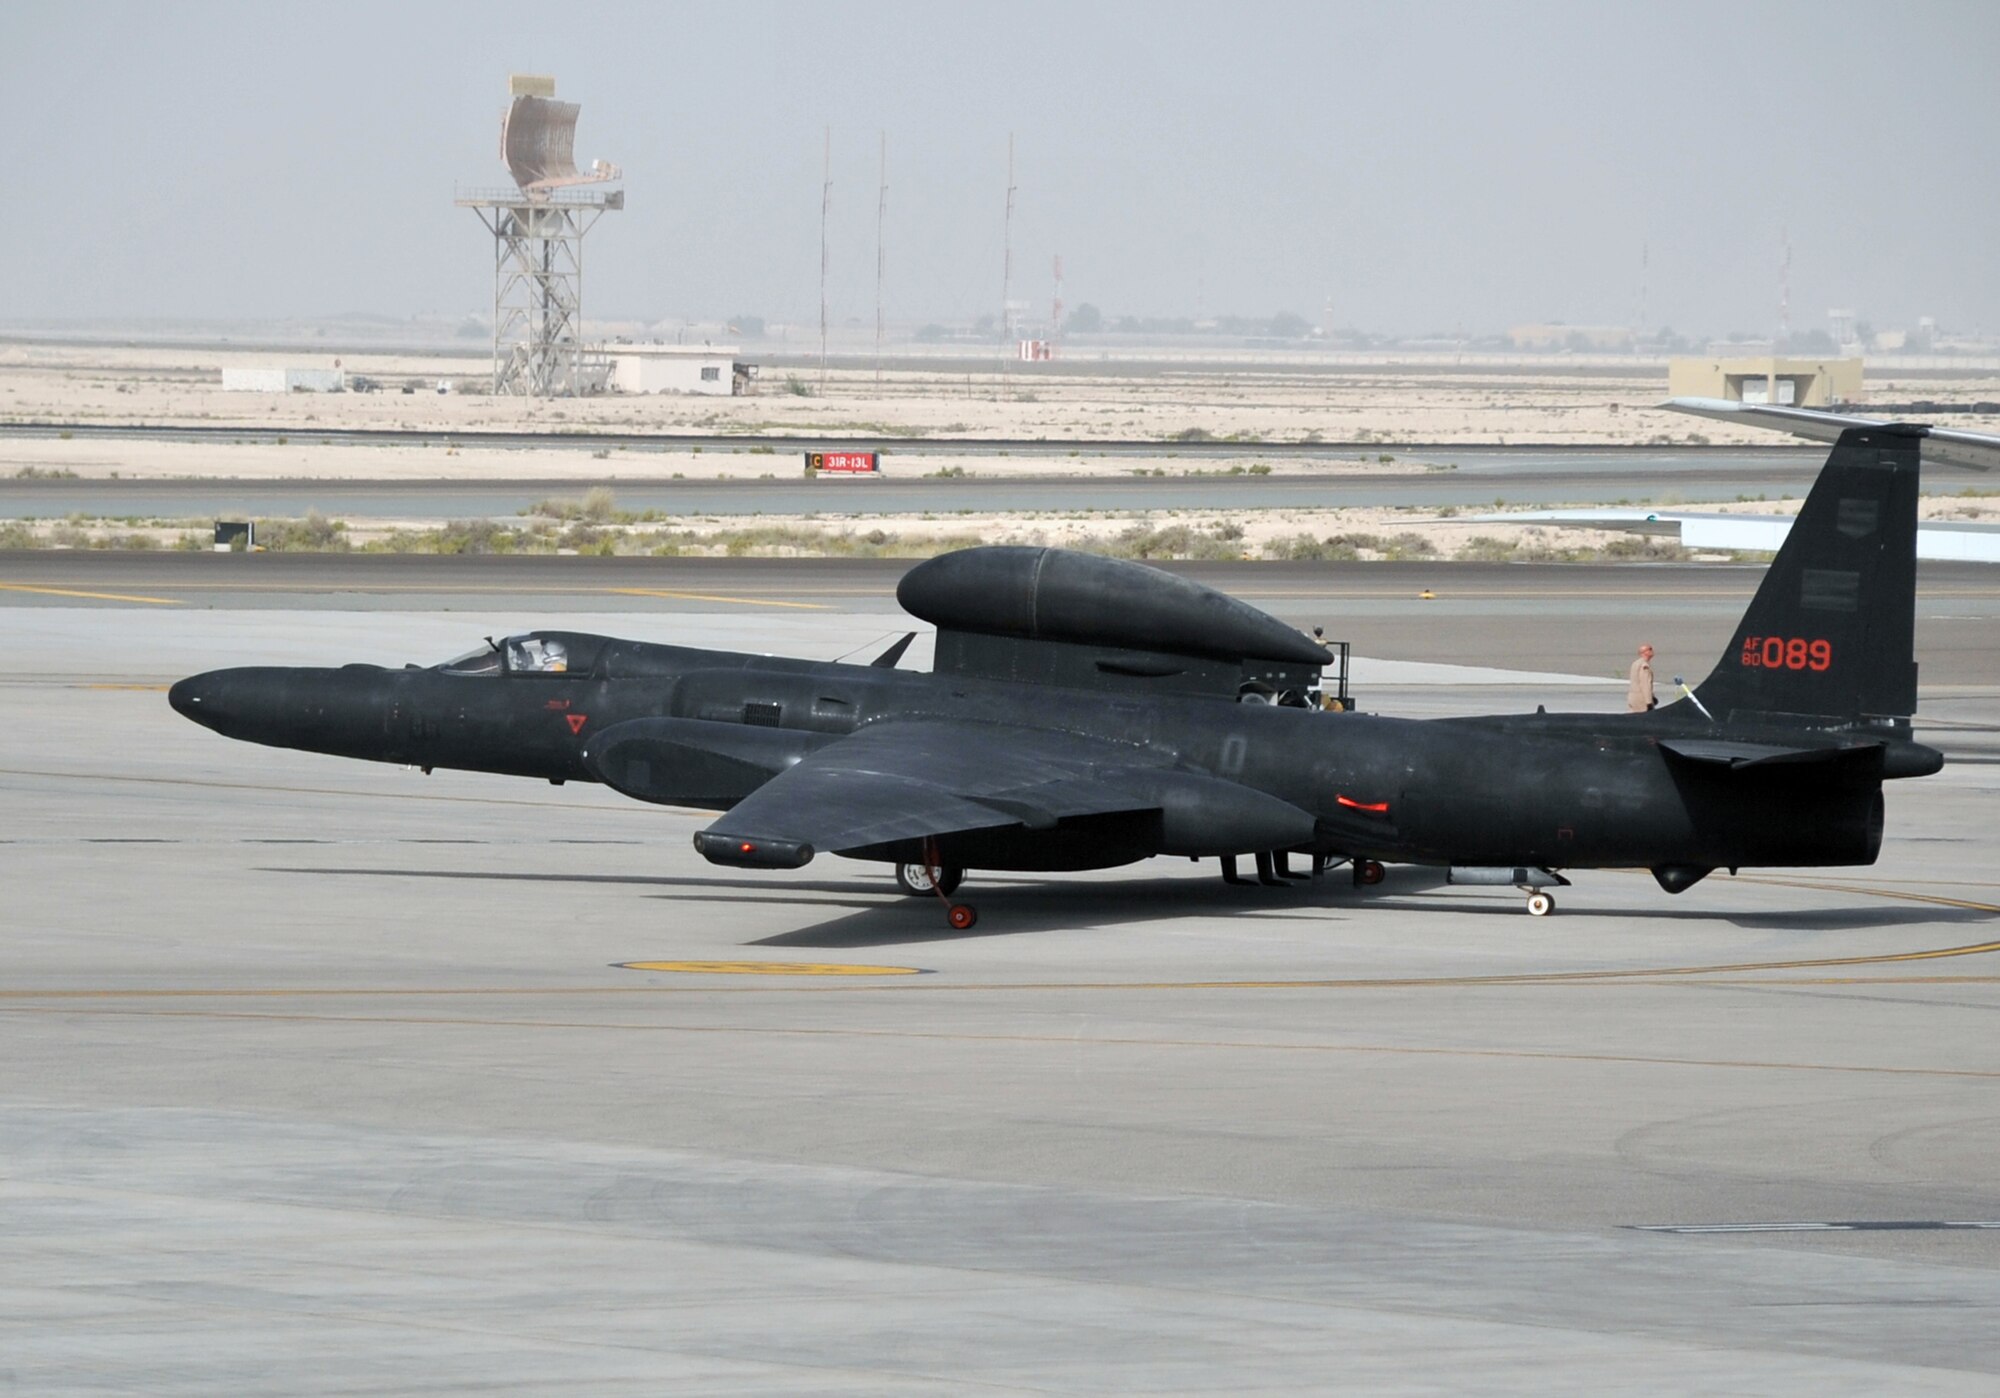 A pilot guides a U-2 Dragon Lady across the air field April 24, 2010, en route to a mission in support of operations in the U.S. Central Command area of responsibility from a non-disclosed base in Southwest Asia. The pilot and the U-2 are with the 99th Expeditionary Reconnaissance Squadron, a unit of the 380th Air Expeditionary Wing.  Through the first three months of 2010, U-2s from the 99th ERS flew nearly 200 missions in support of intelligence, surveillance and reconnaissance requirements for deployed forces supporting operations Iraqi Freedom and Enduring Freedom and the Combined Joint Task Force-Horn of Africa. (U.S. Air Force Photo/Master Sgt. Scott T. Sturkol/Released)